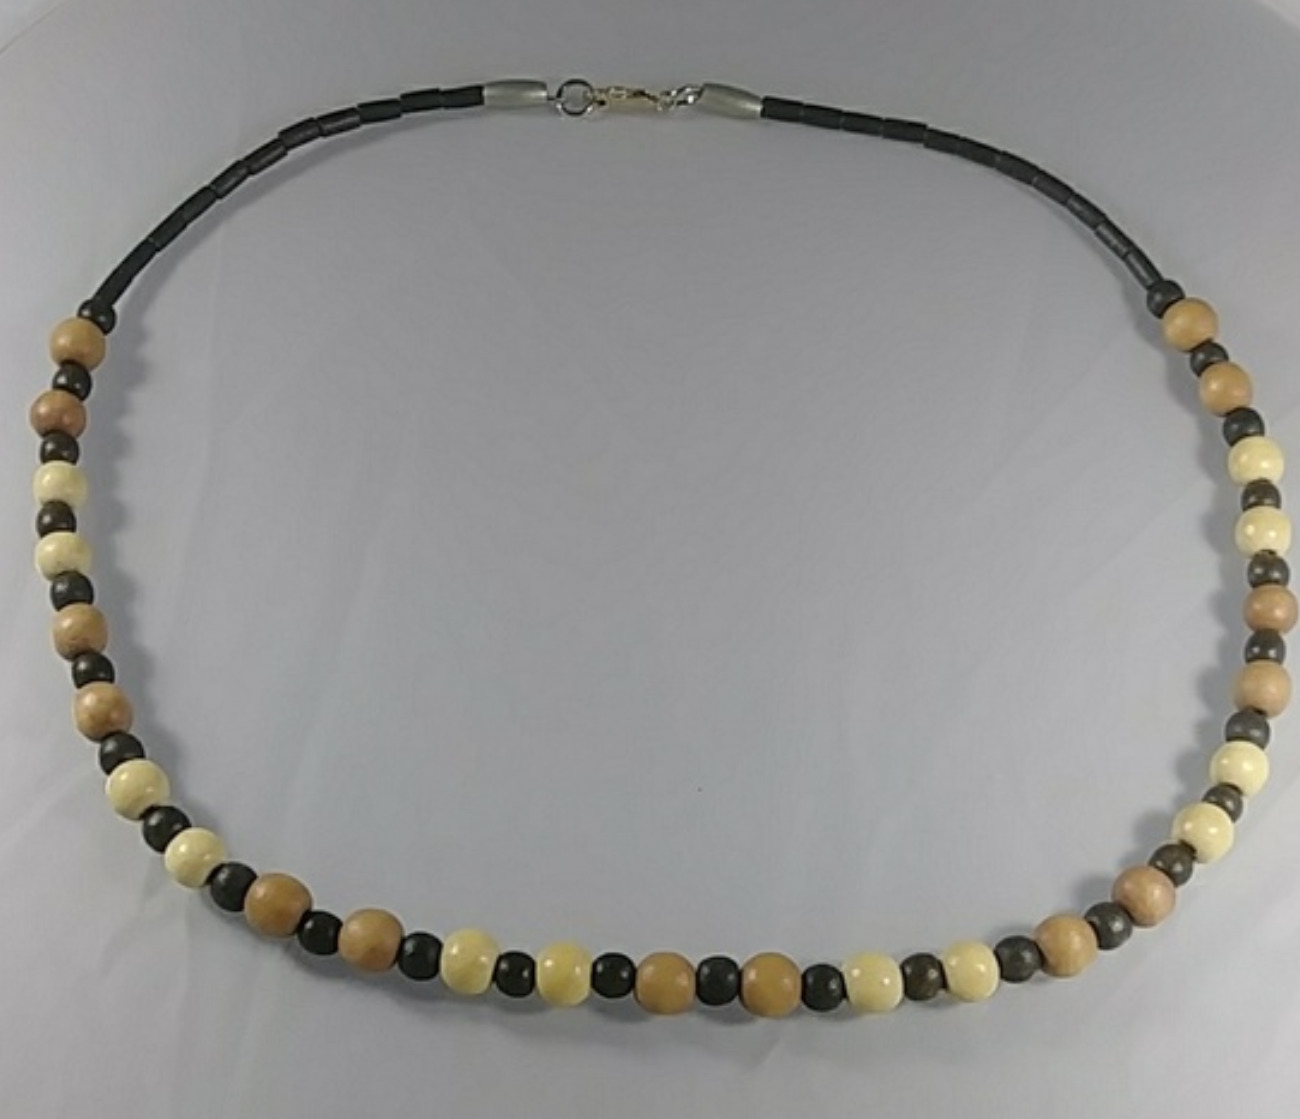 (376-NCK-MEN) - Description: Sterling Silver Lobster Claw, Wood Beads, Silver tone Beads - (Hand strung on bead stringing wire)  - Dimension: 21 3/4' L (Inches)